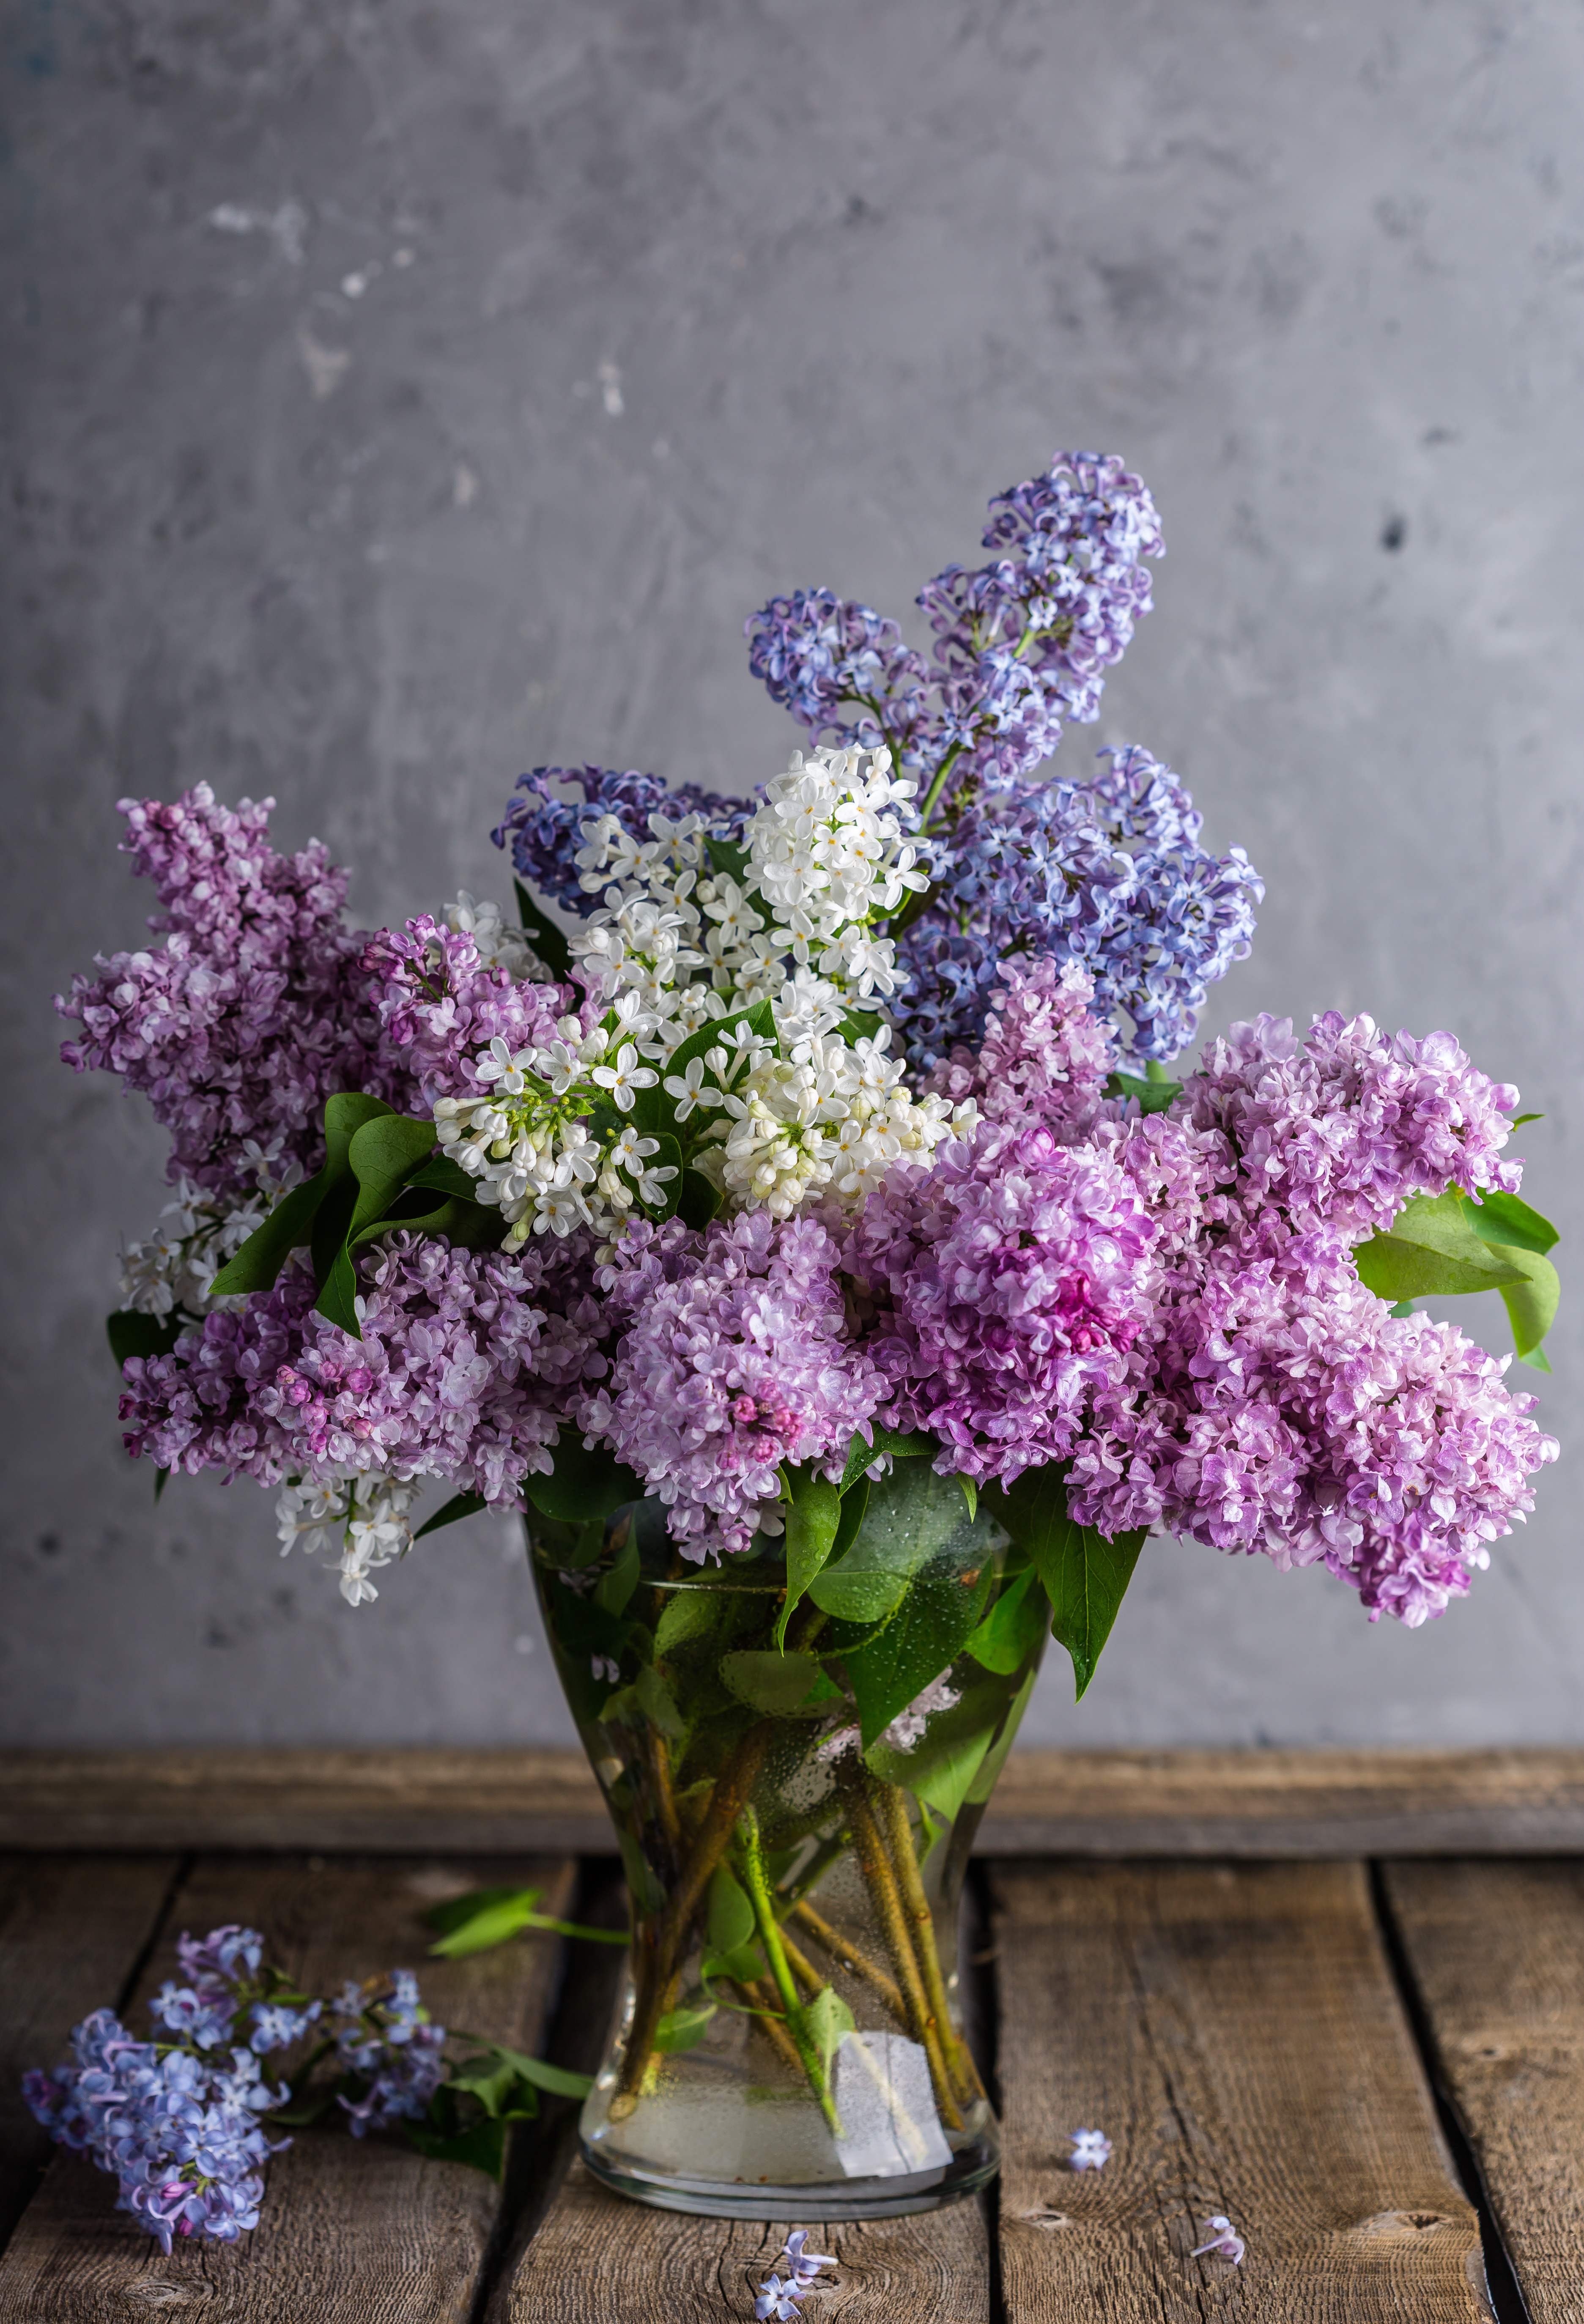 Lilac flowers in a vase